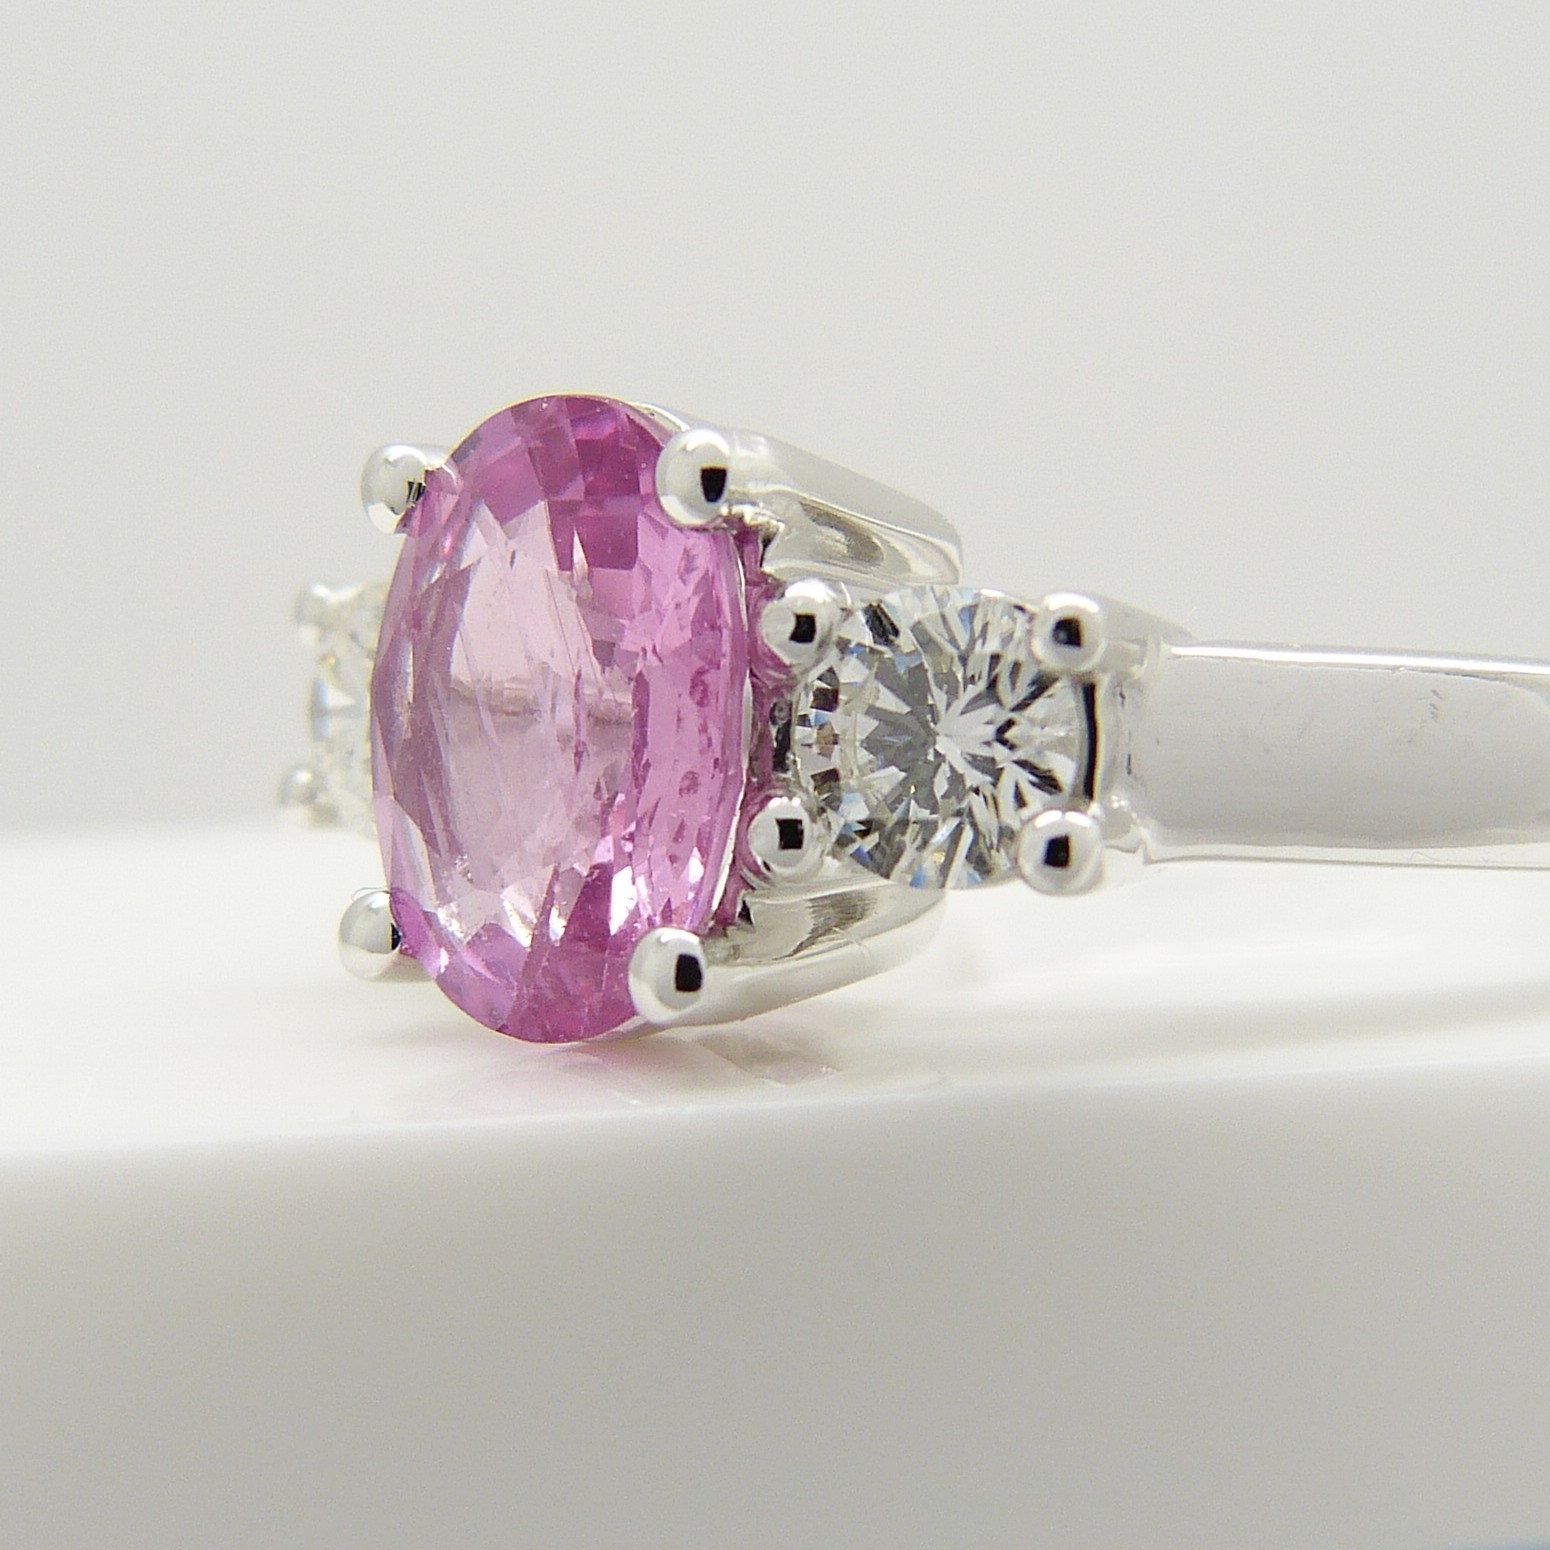 18ct white gold oval-cut pink sapphire and round brilliant-cut diamond dress ring - Image 4 of 5